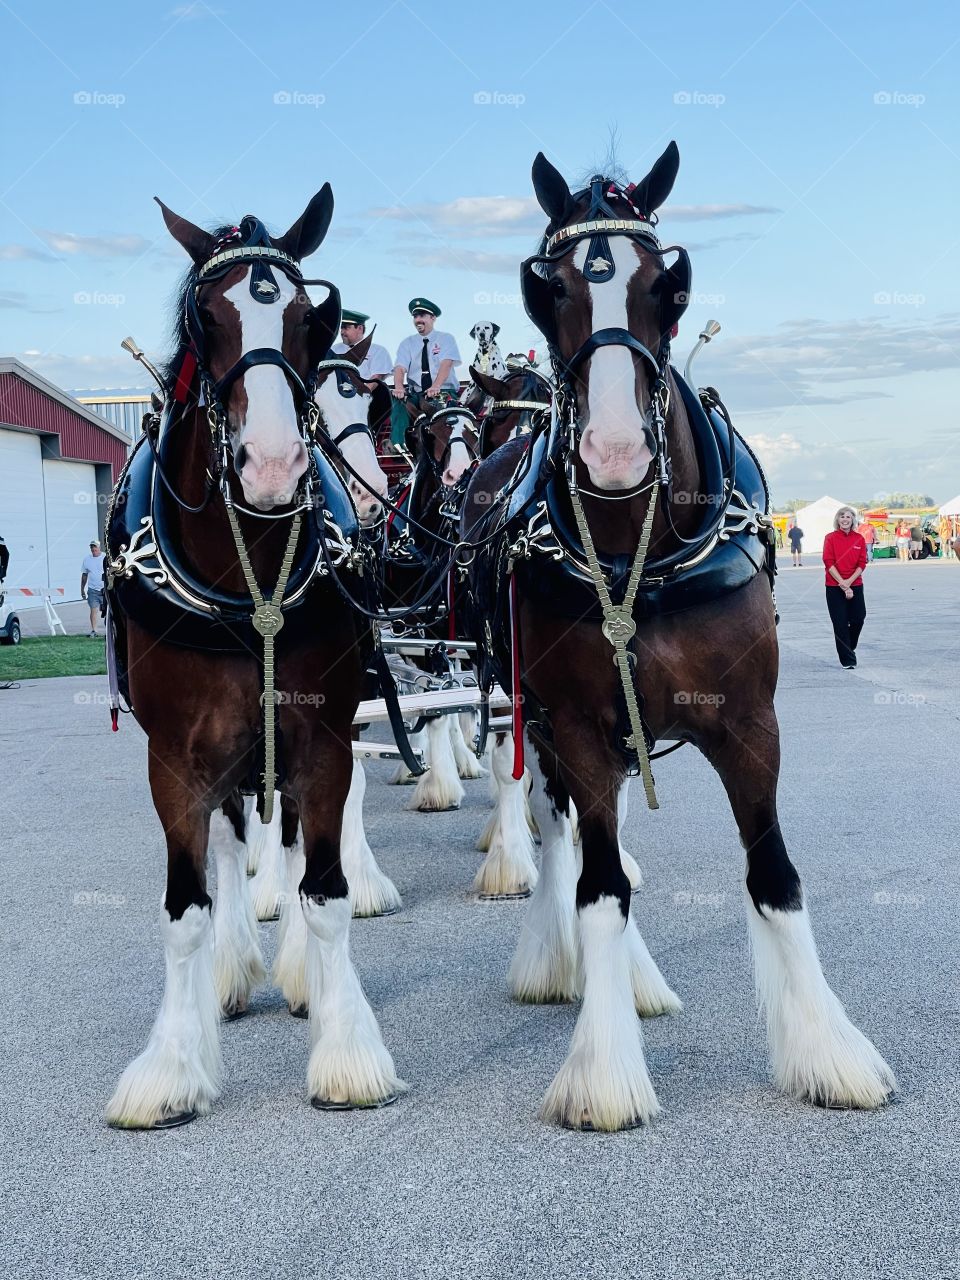 Clydesdale horses. Beautiful. Meet them